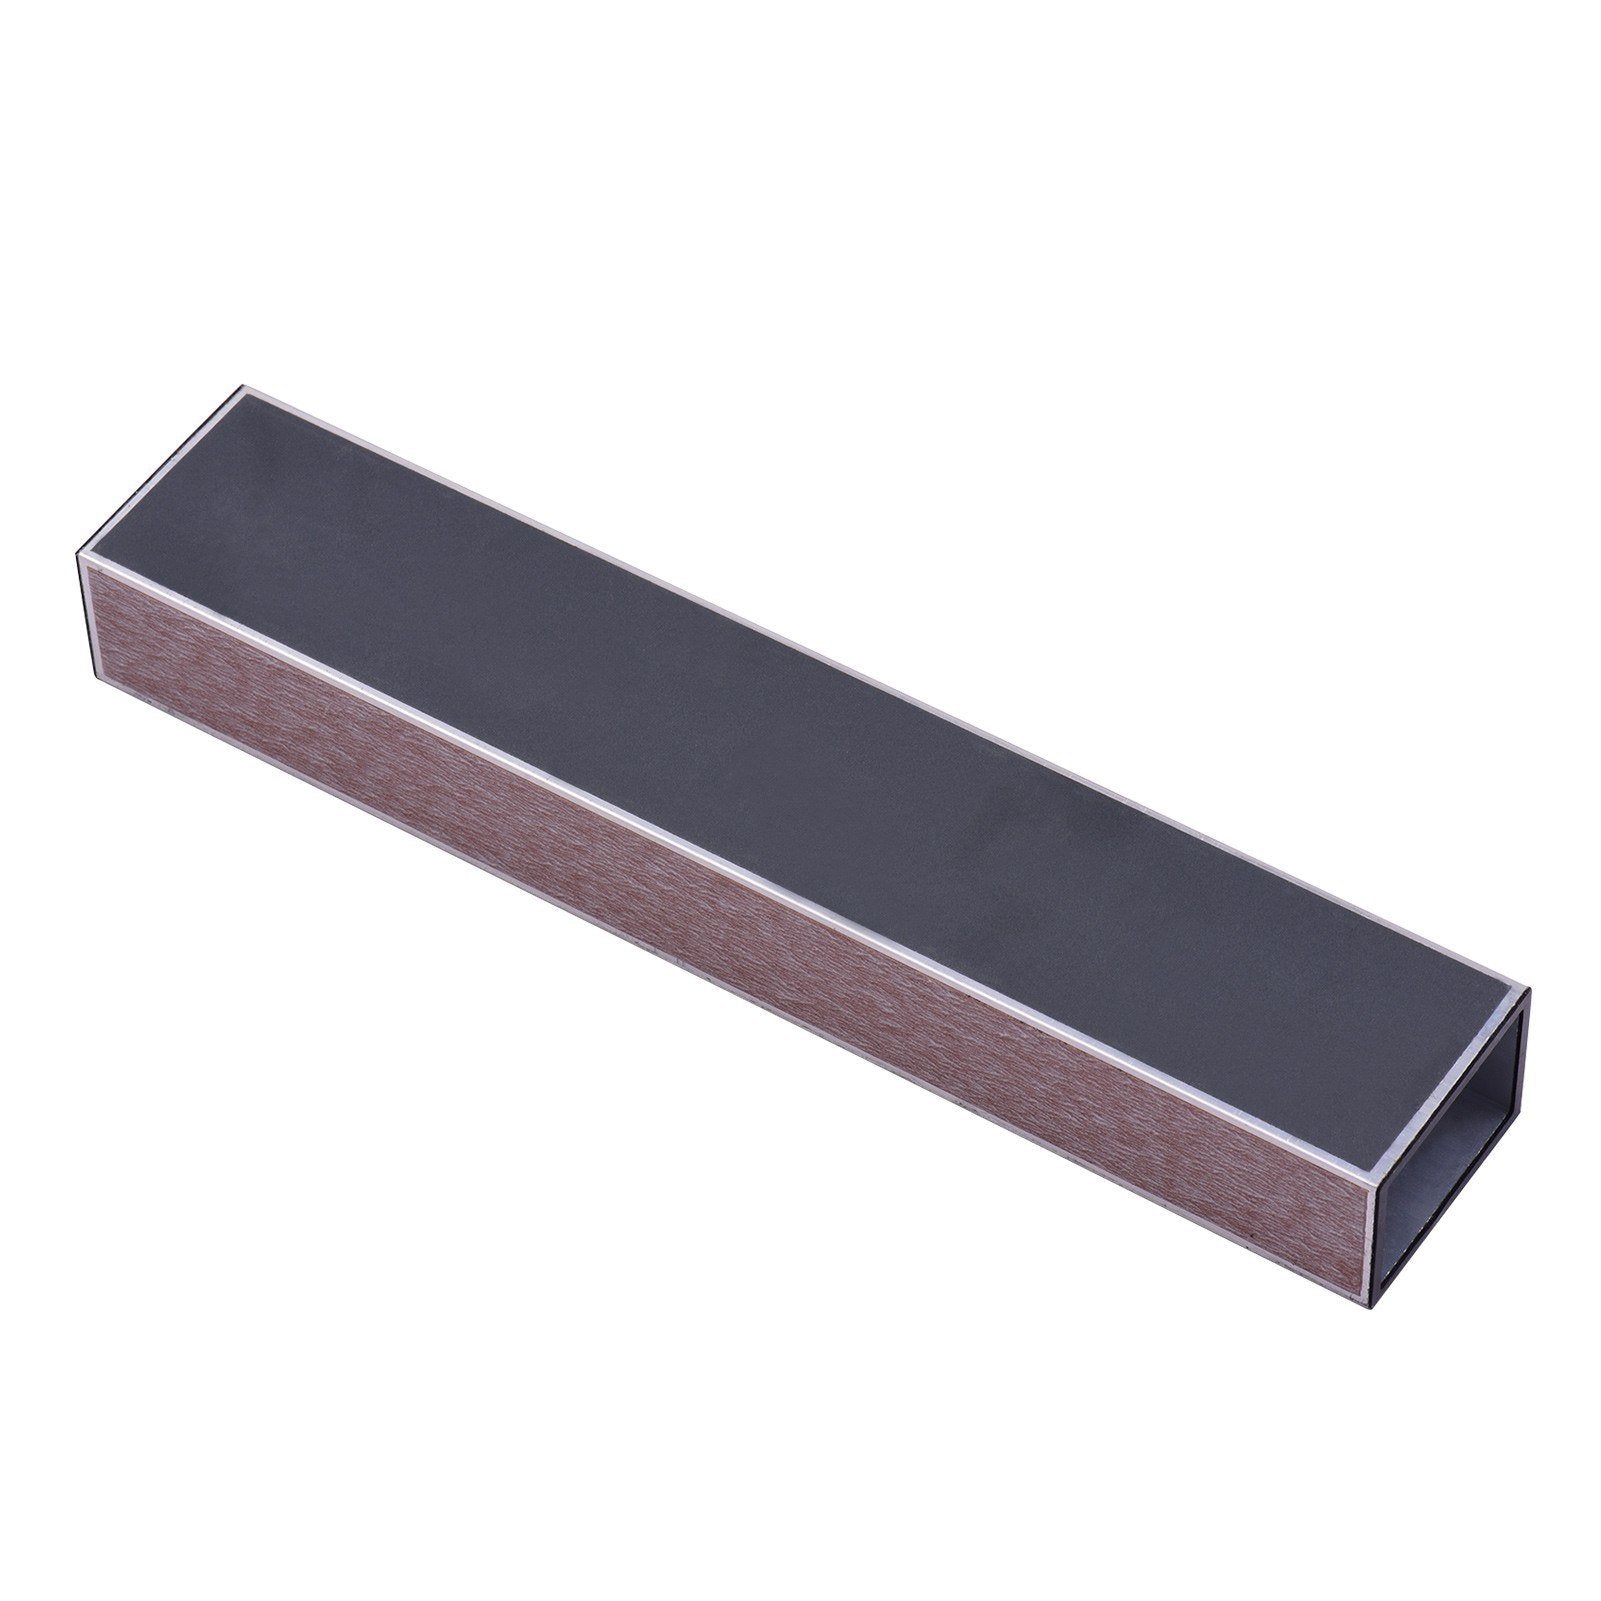 Guitar Fret Leveling Beam Bar 15CM with Replacement Sandpaper Maintenance Tool